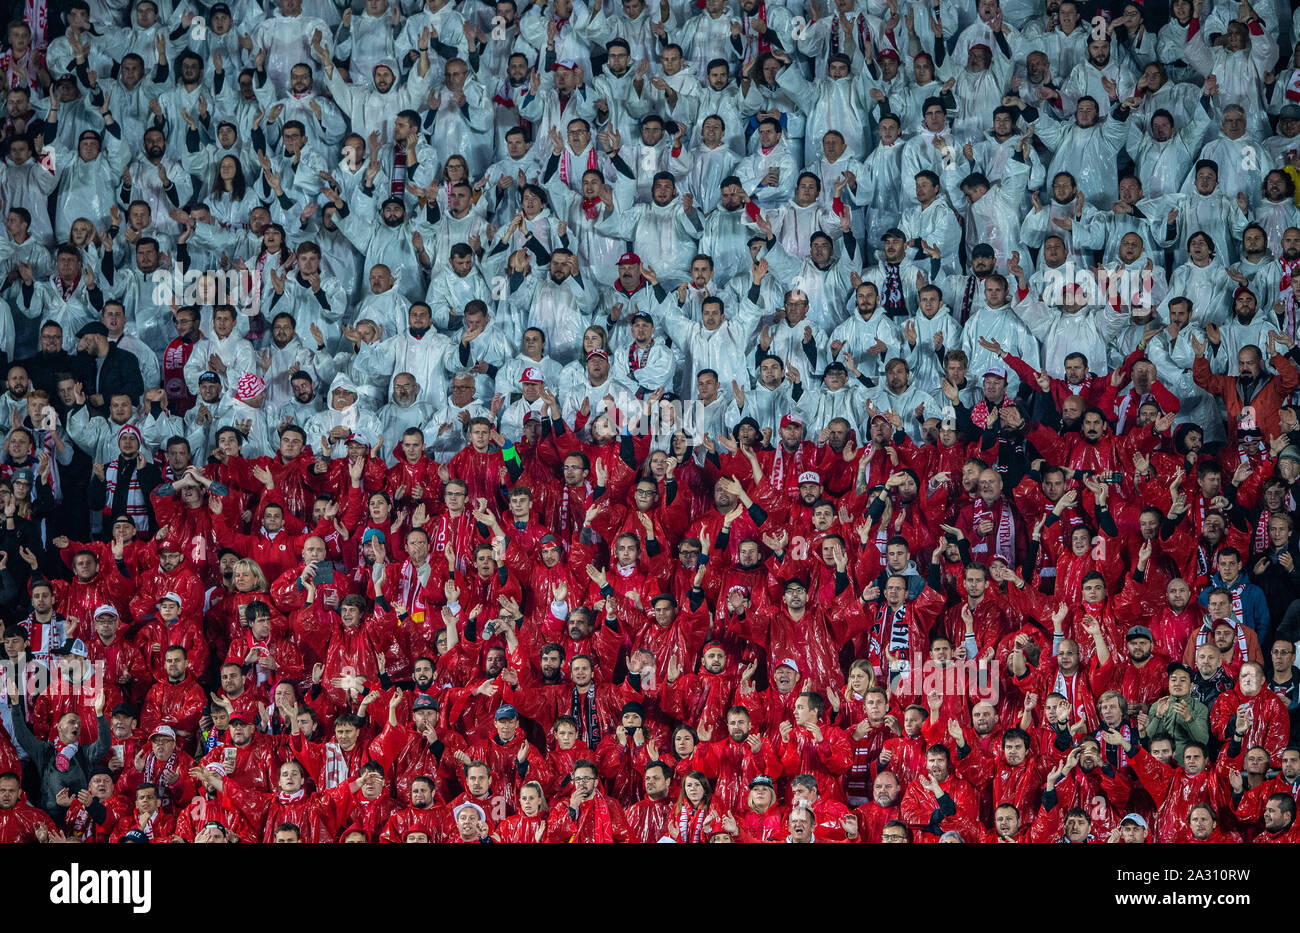 Prag, Czechia. 02nd Oct, 2019. Soccer: Champions League, Slavia Prague - Borussia Dortmund, Group stage, Group F, 2nd matchday at Sinobo Stadium. The fans of Slavia Prague are in the fan curve with red and white rainwear. Credit: Guido Kirchner/dpa/Alamy Live News Stock Photo